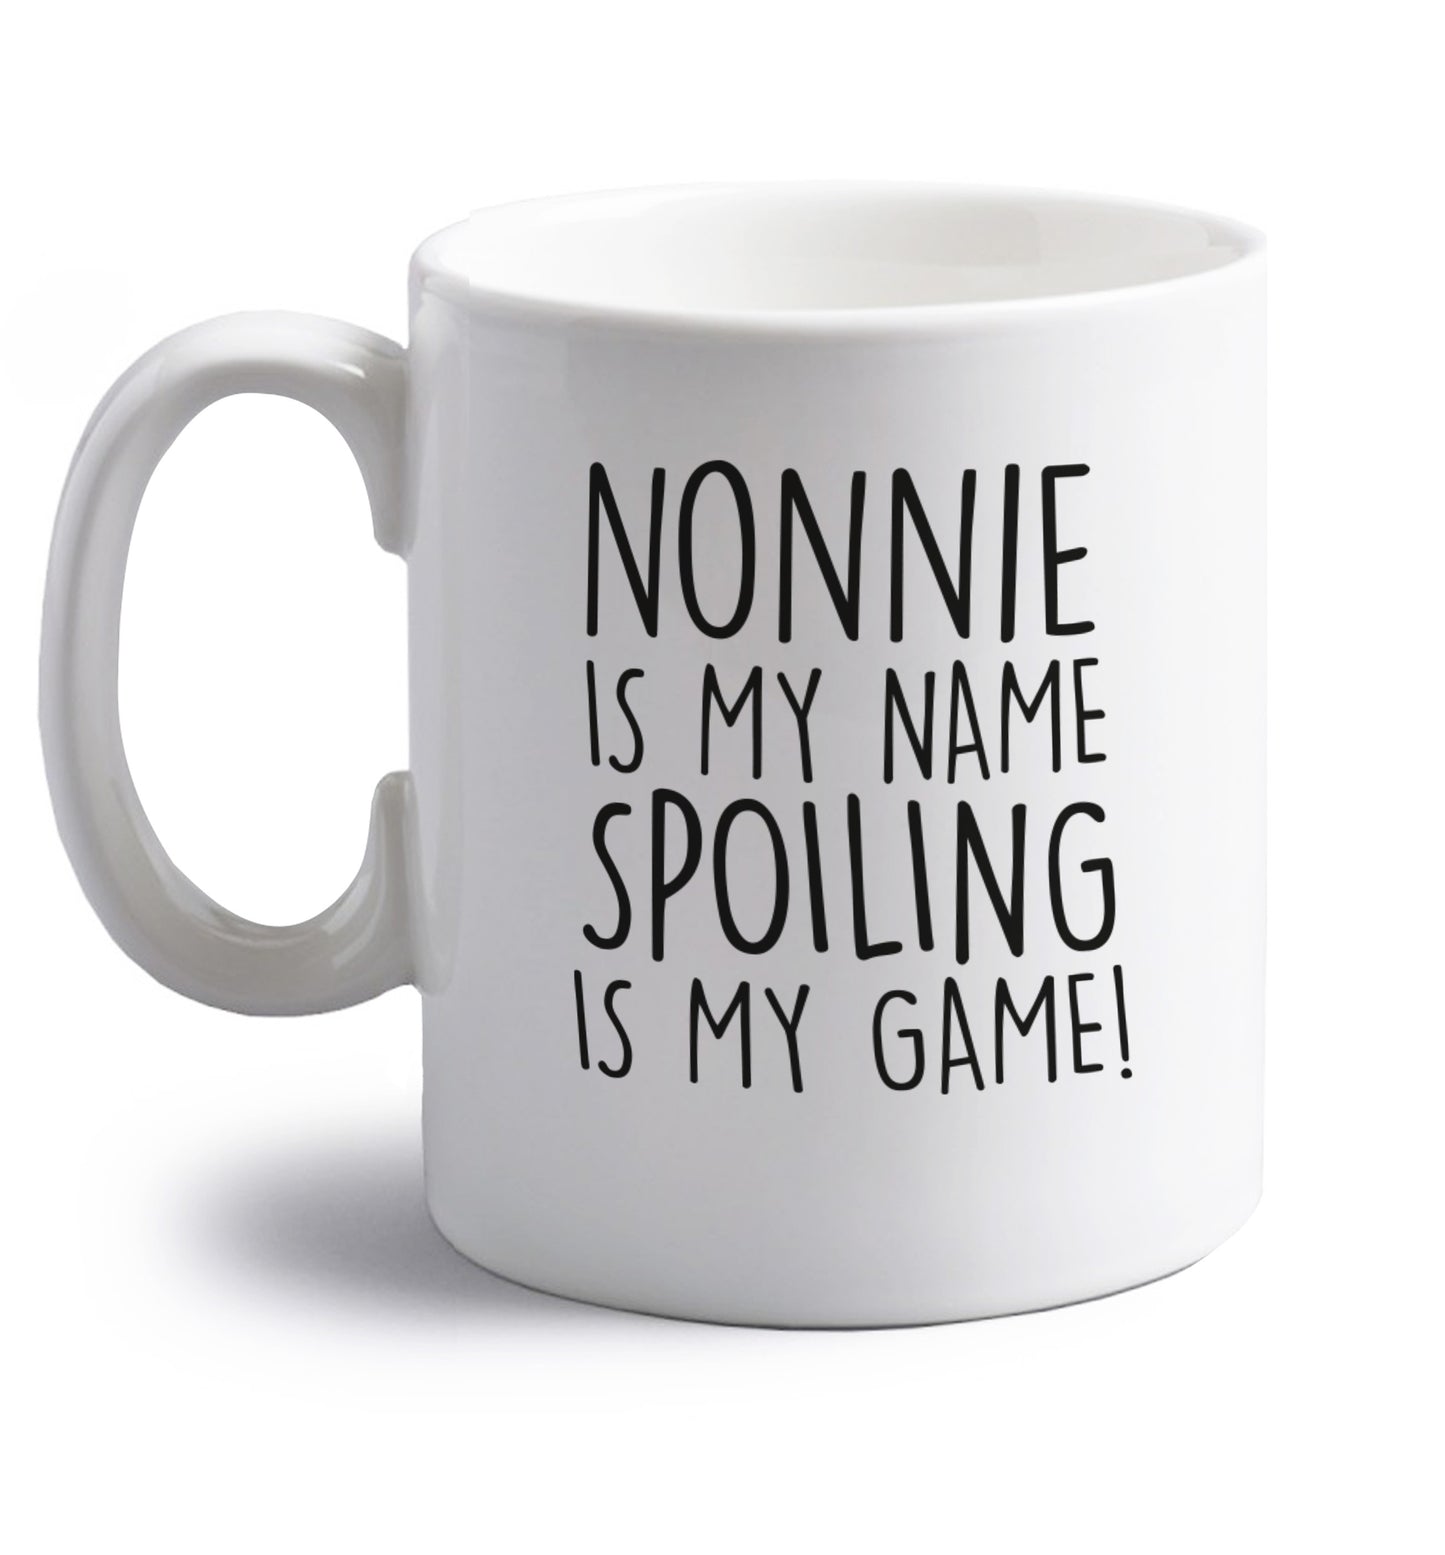 Nonnie is my name, spoiling is my game right handed white ceramic mug 